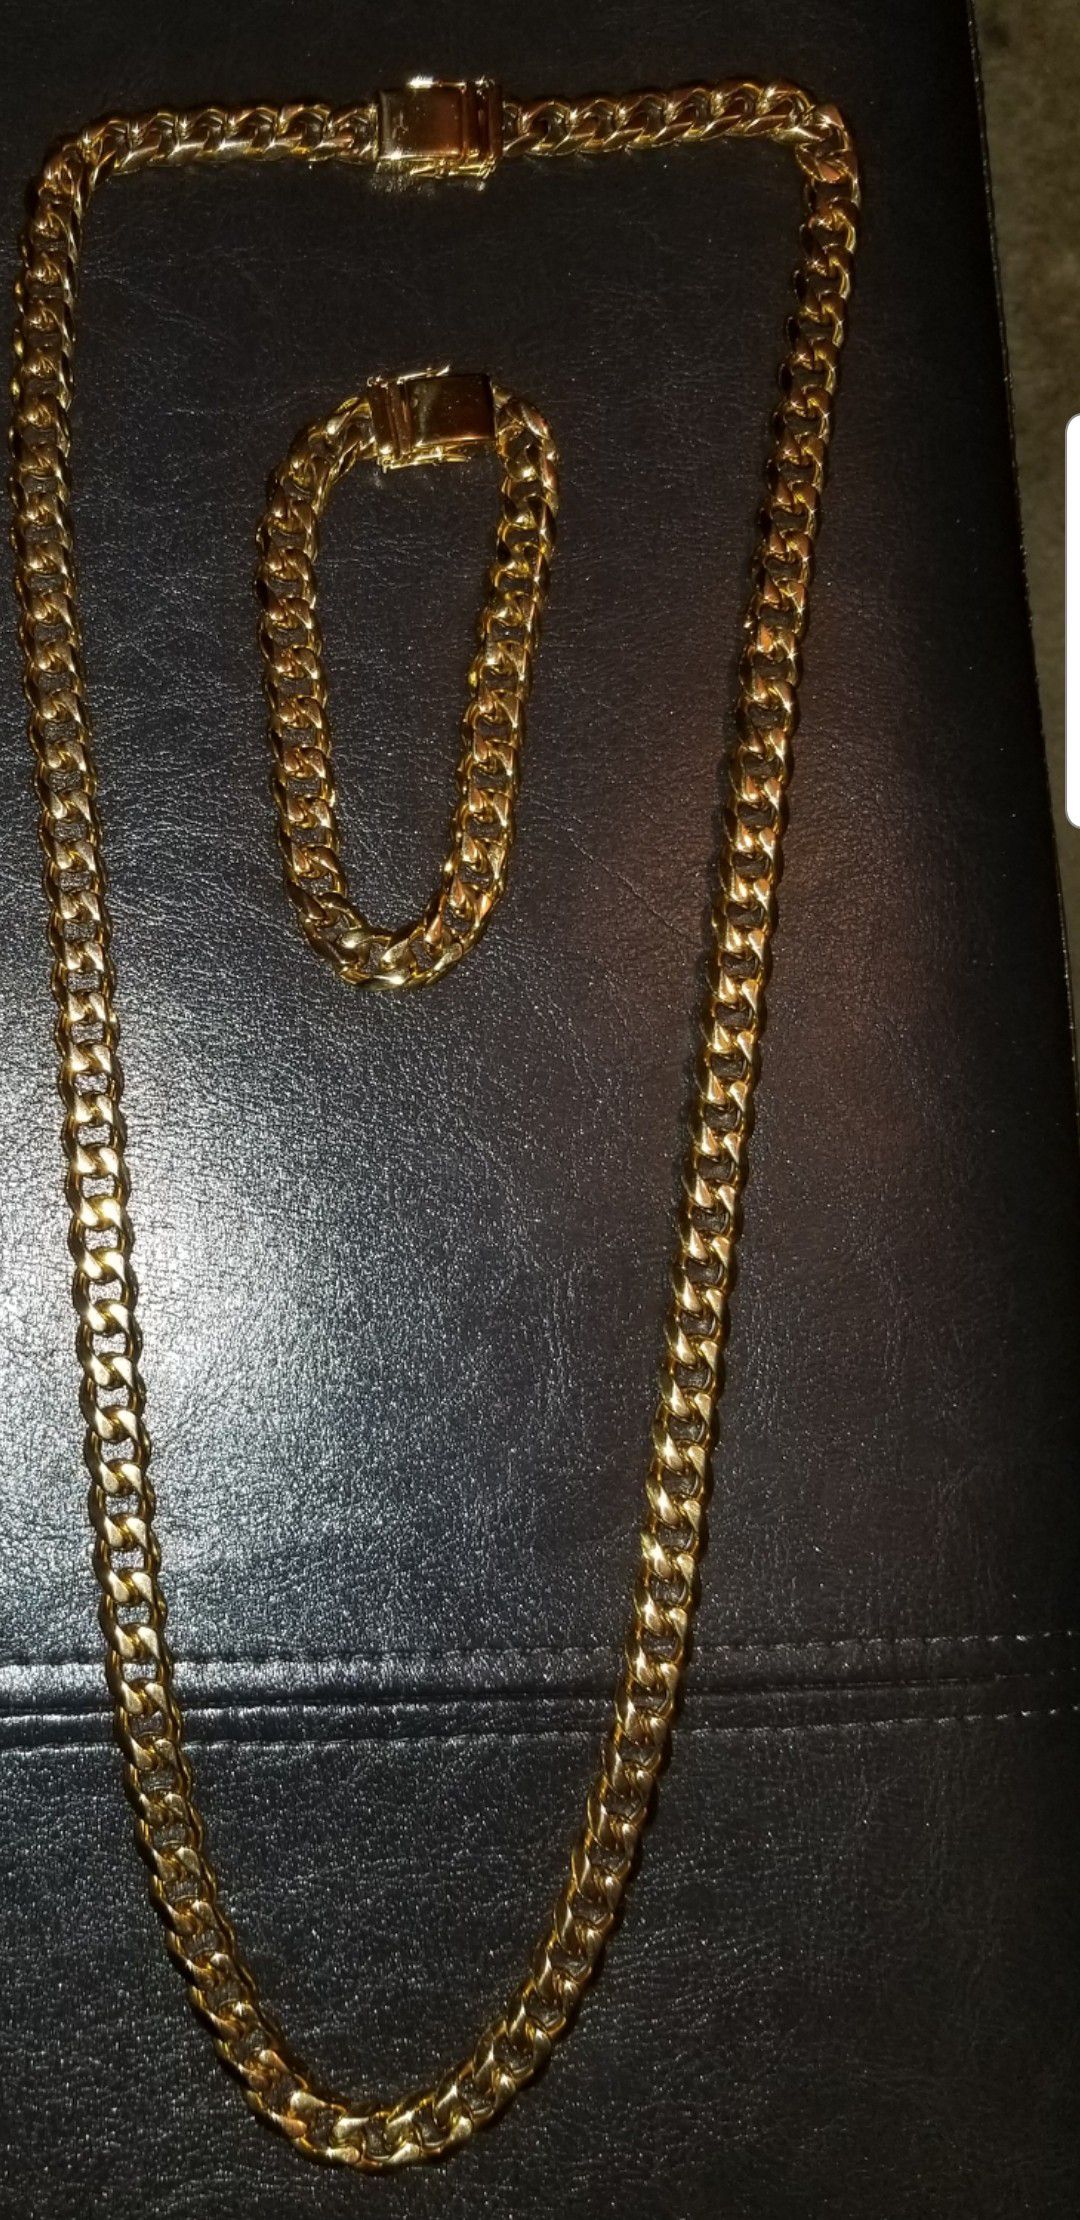 Stainless steel Cuban link 30"chain and bracelet set